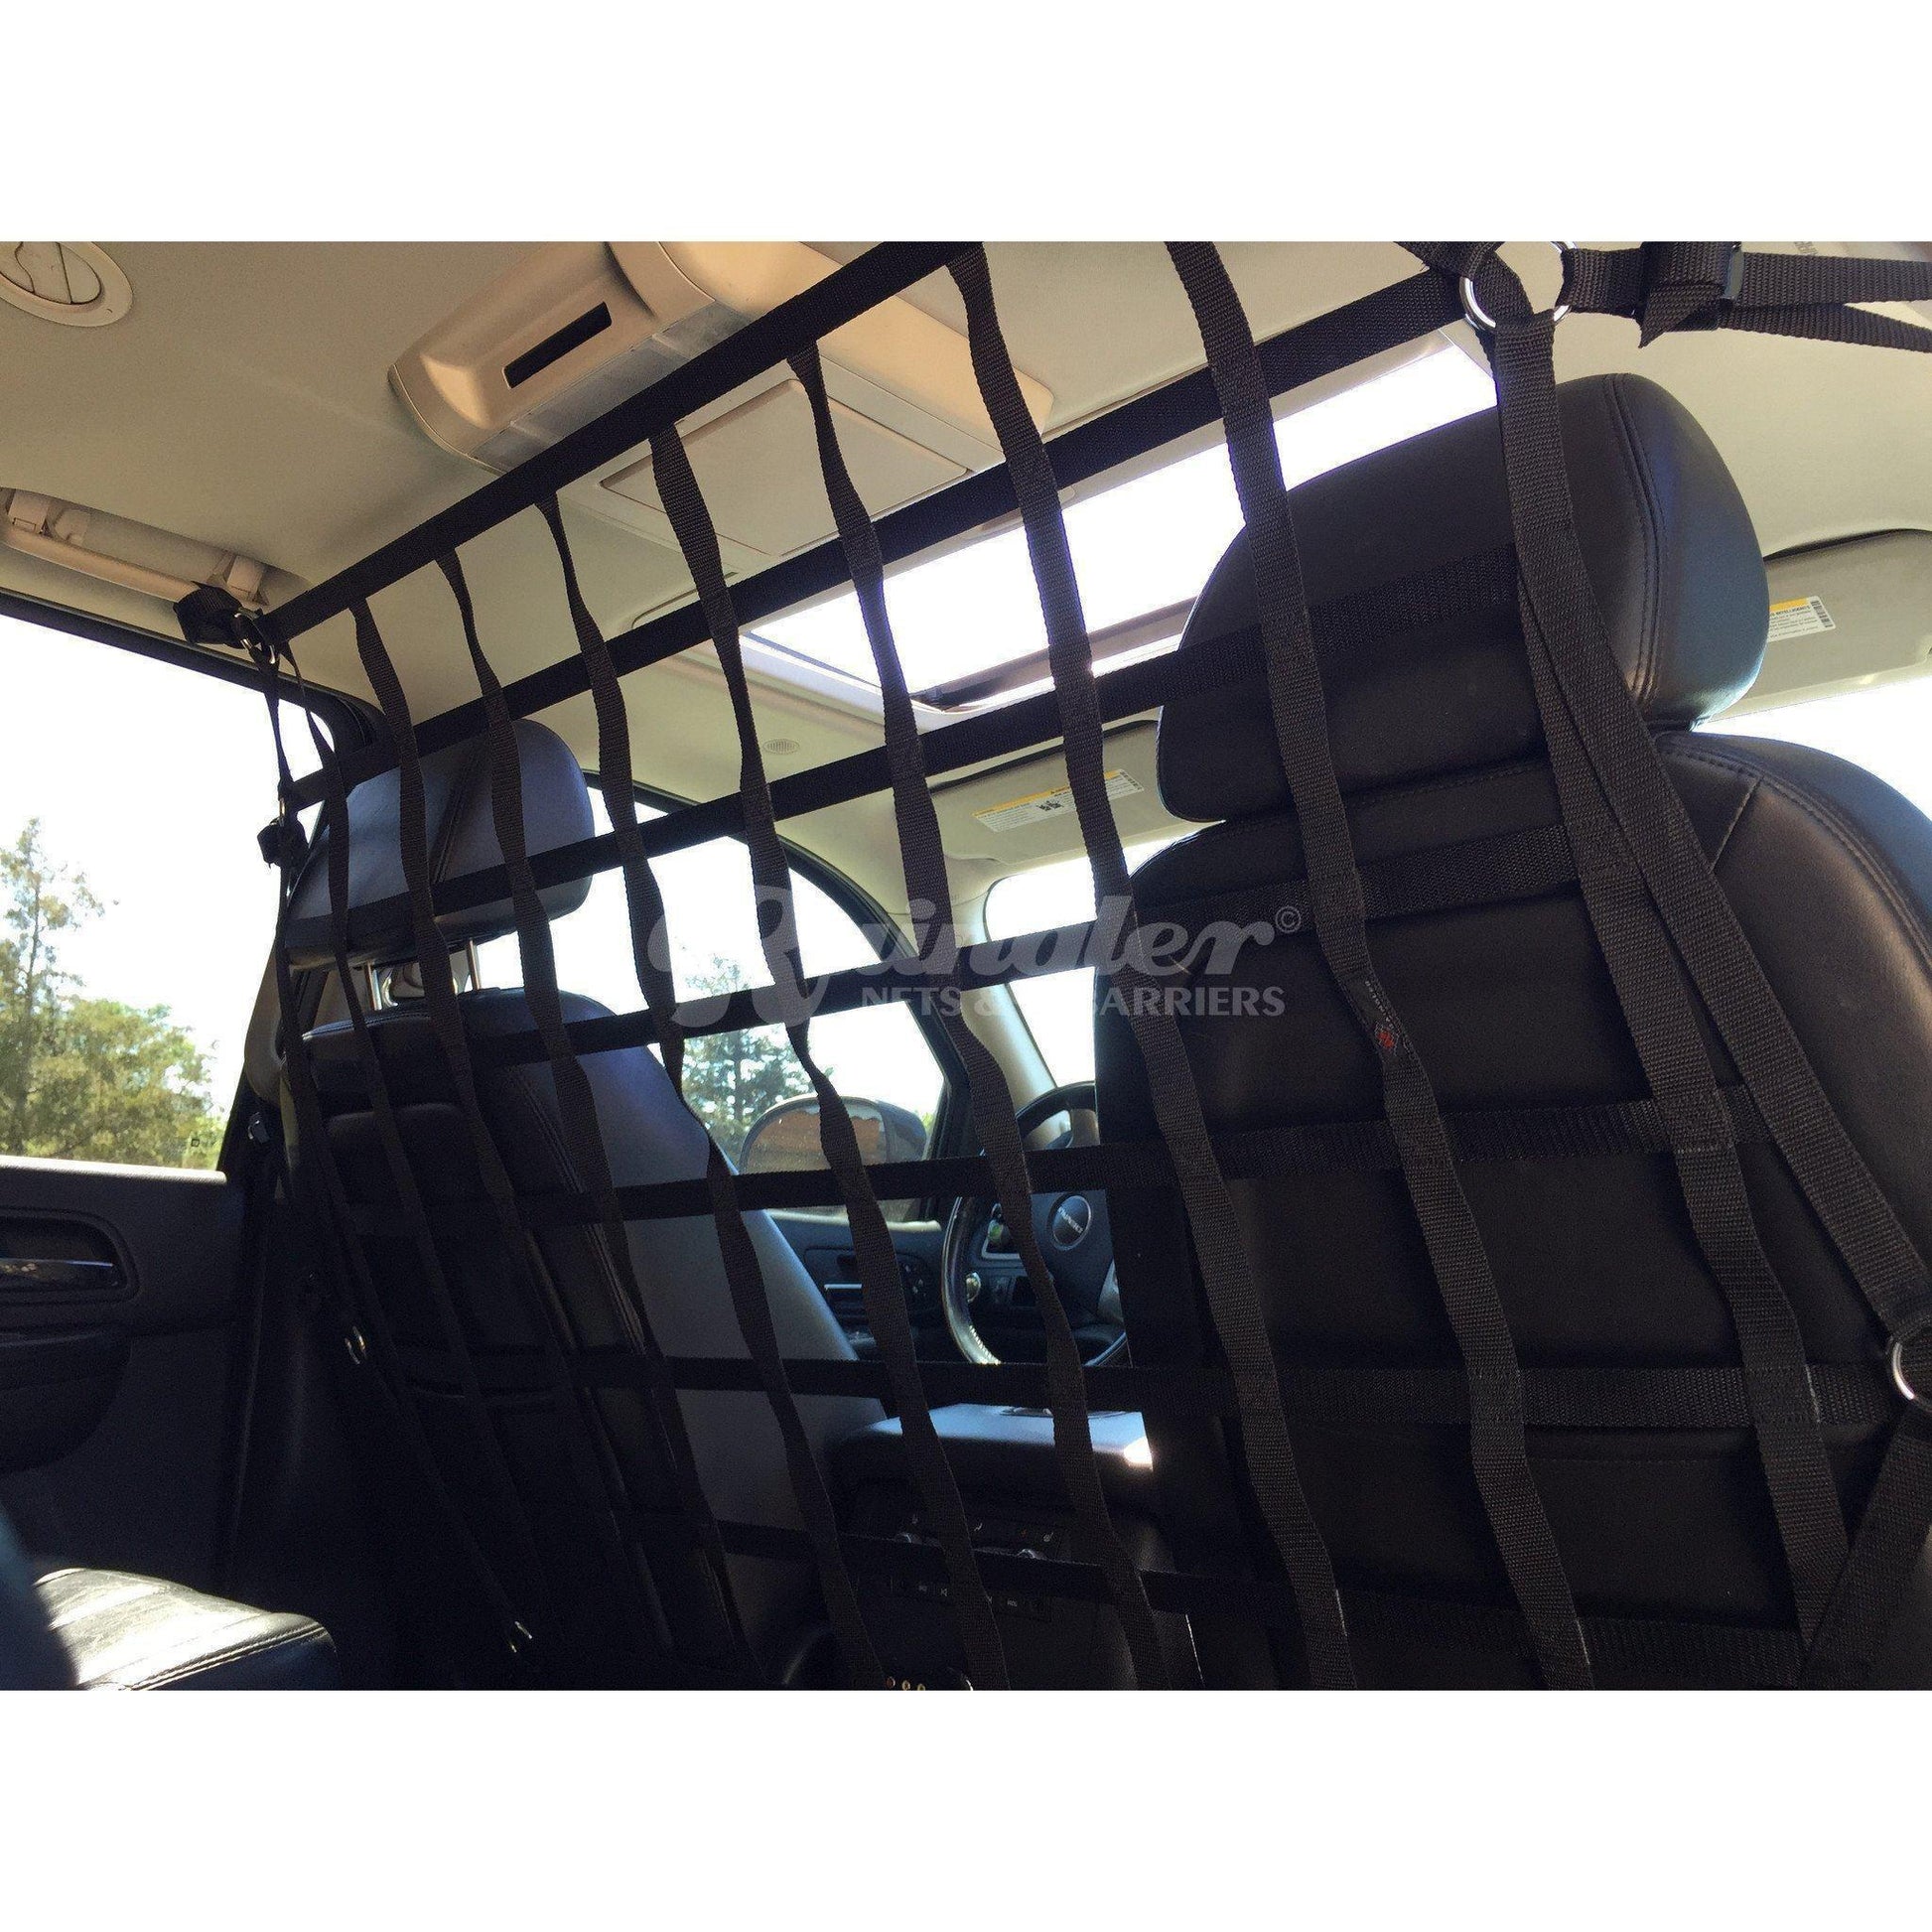 2007 - 2013 Chevrolet Silverado 1500 Crew Cab / Extended Cab Behind Front Seats Barrier Divider Net